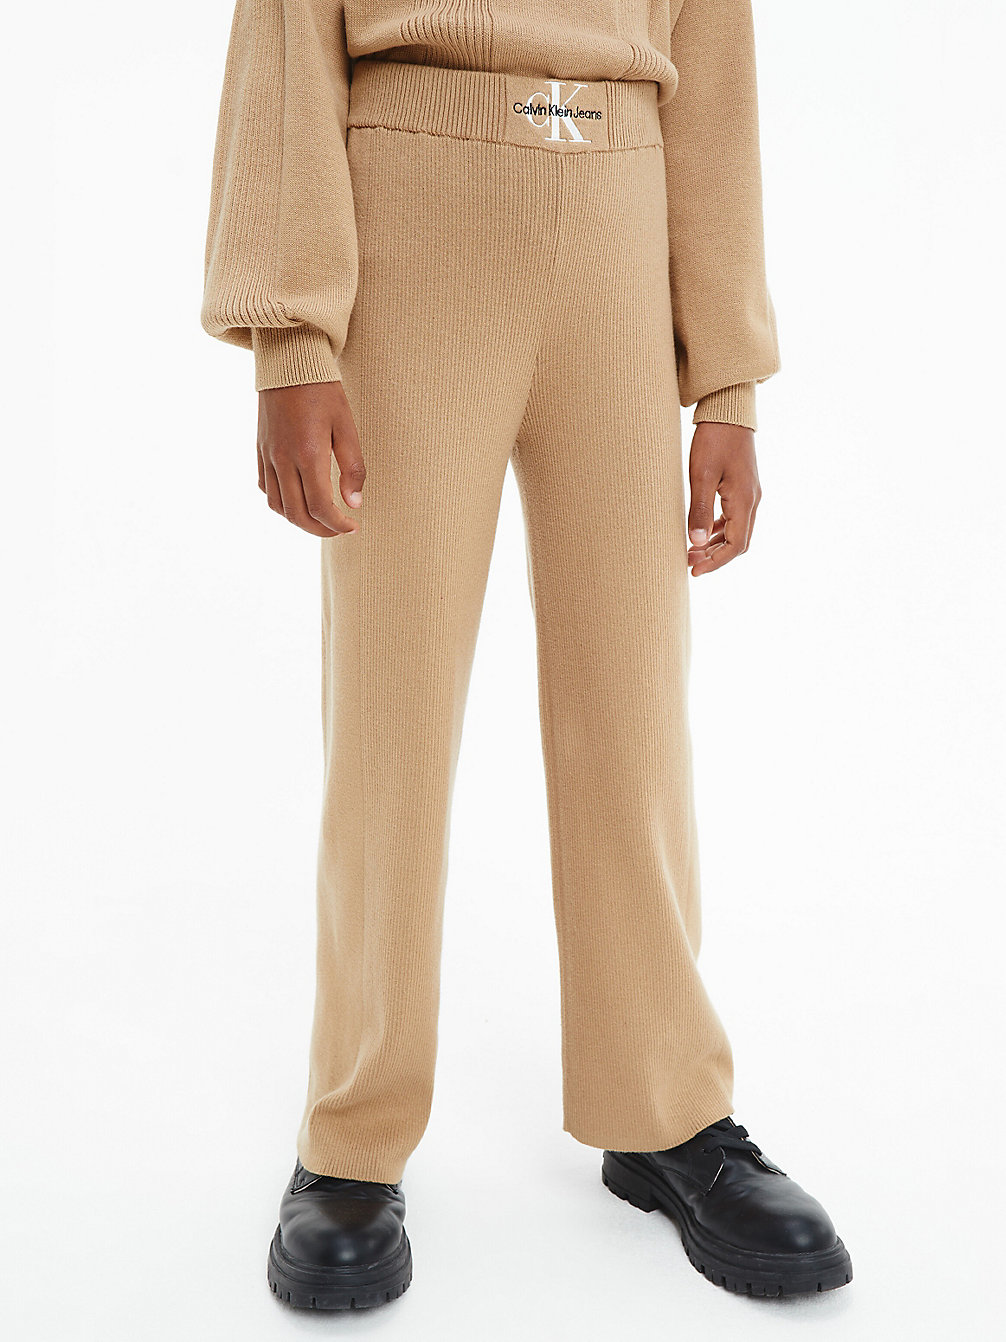 TIMELESS CAMEL Organic Cotton Ribbed Trousers undefined girls Calvin Klein